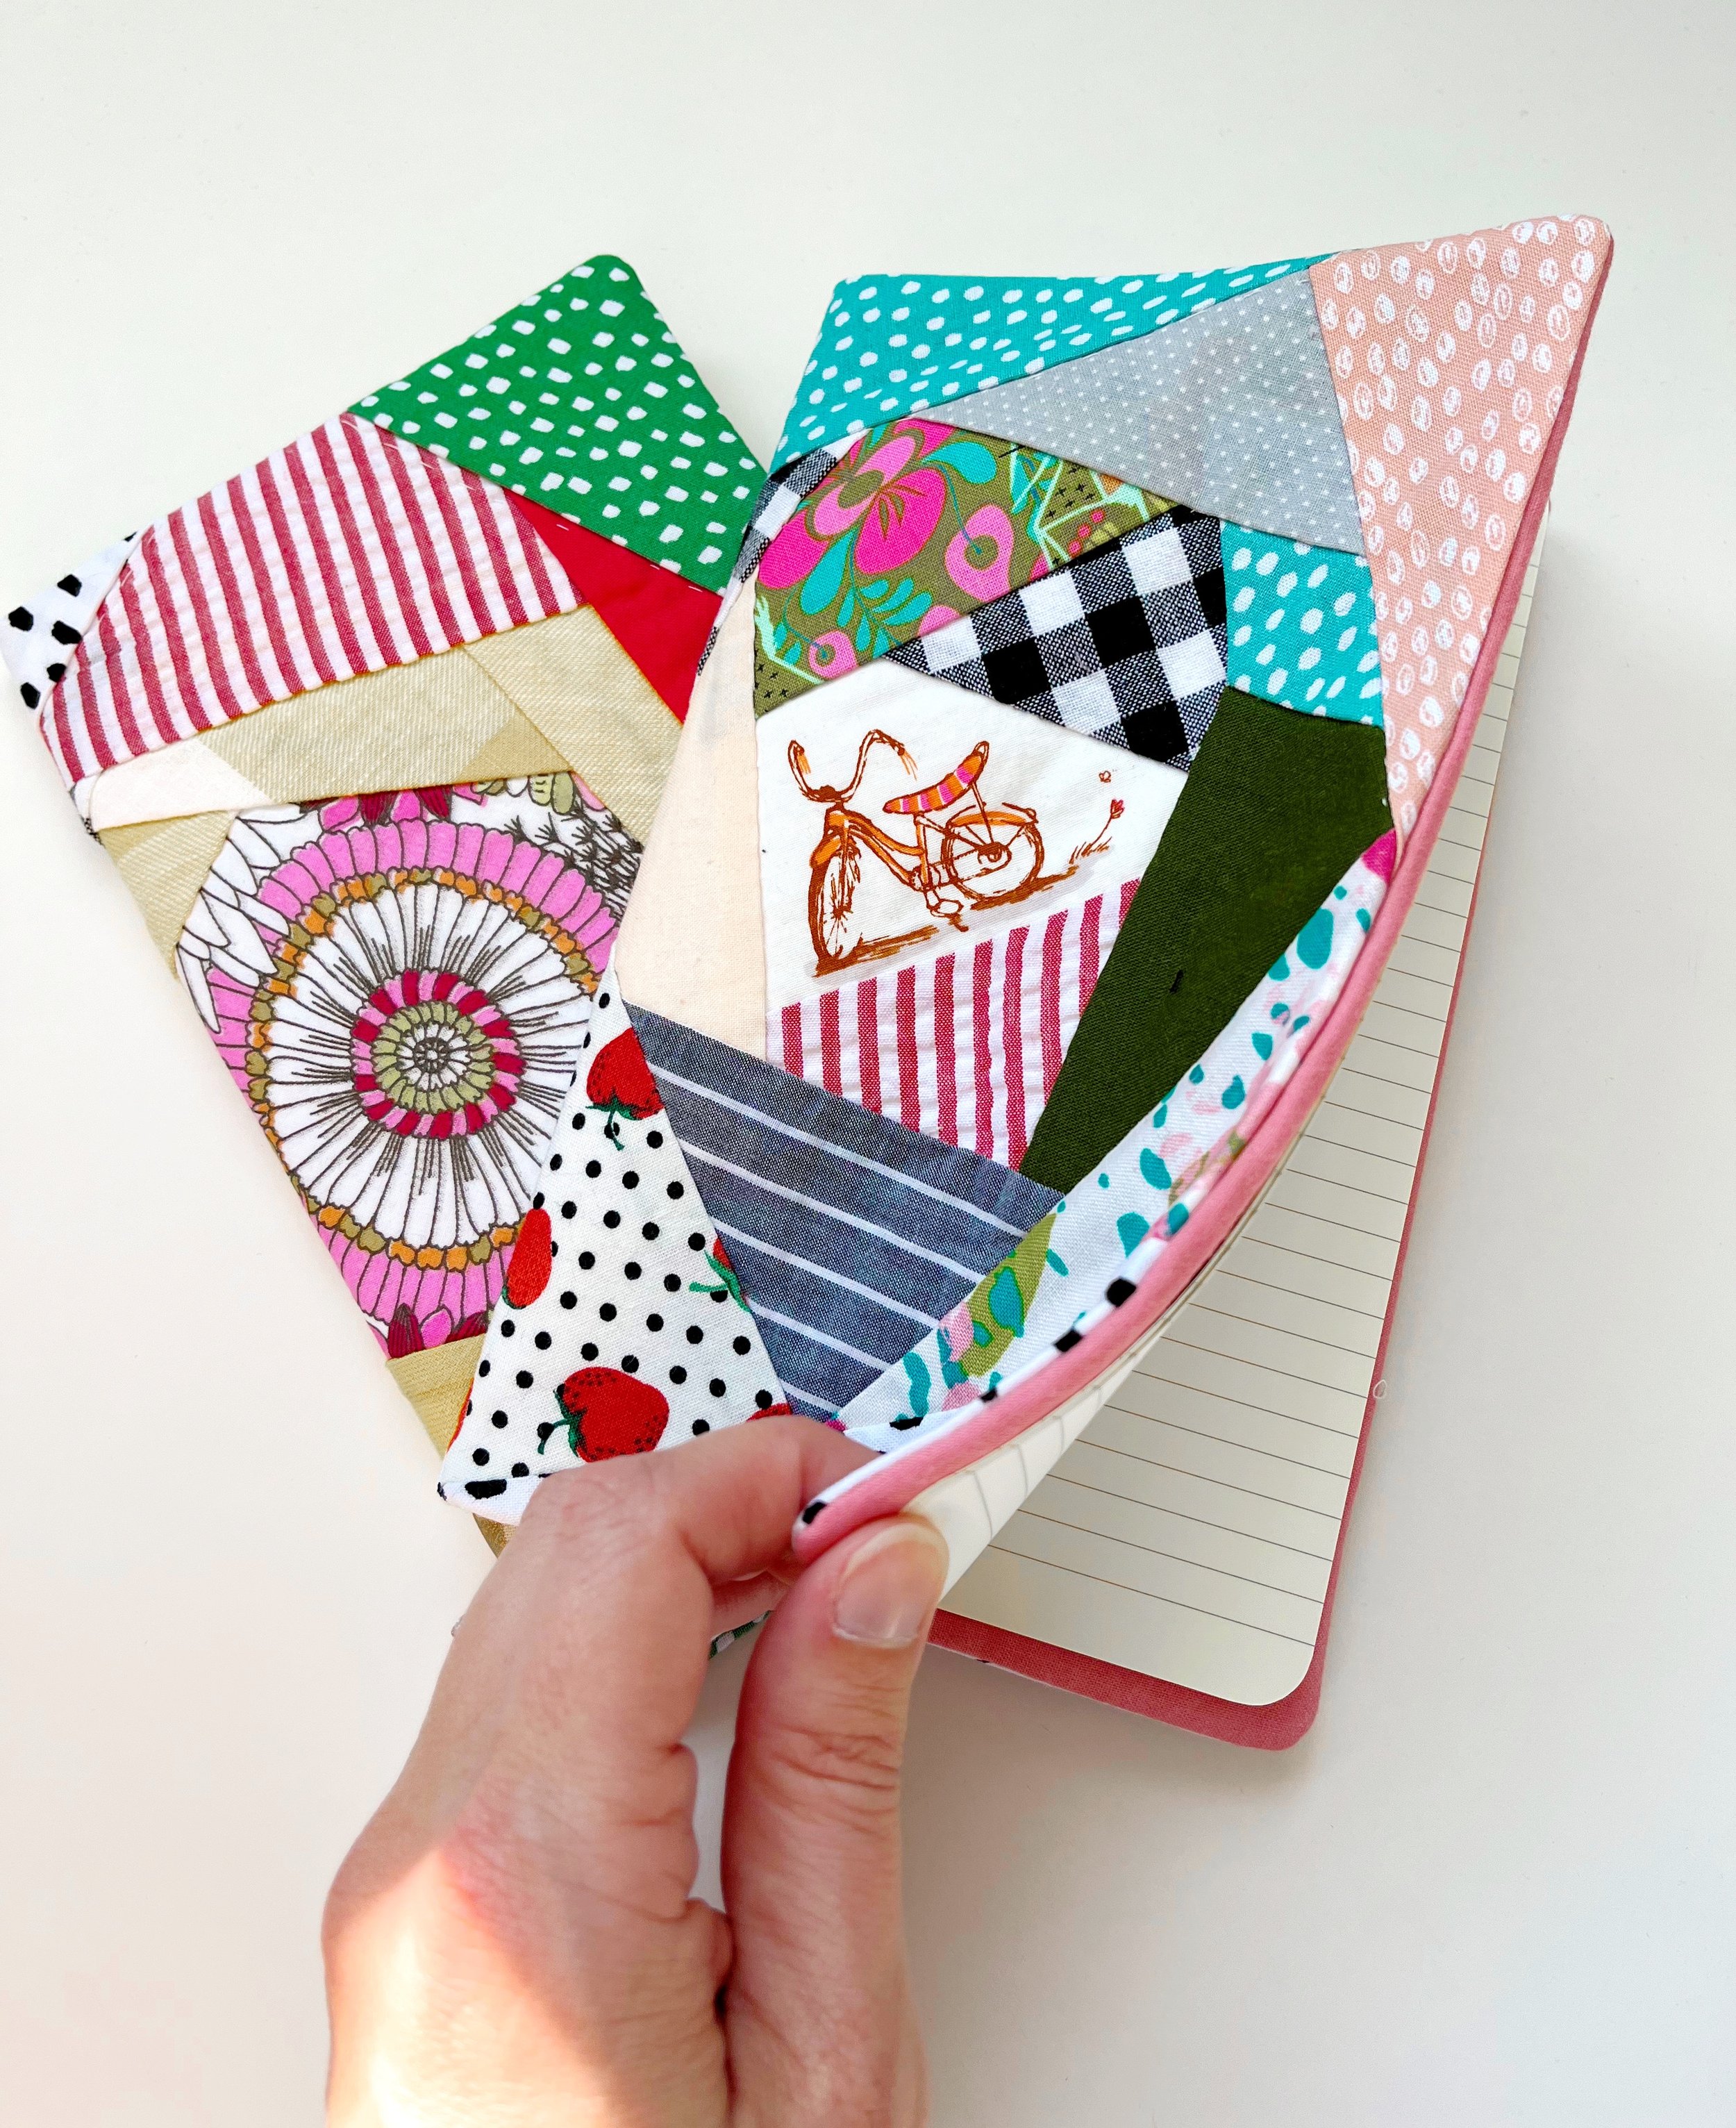 Ideas to use fabric scraps - Diary of a Quilter - a quilt blog